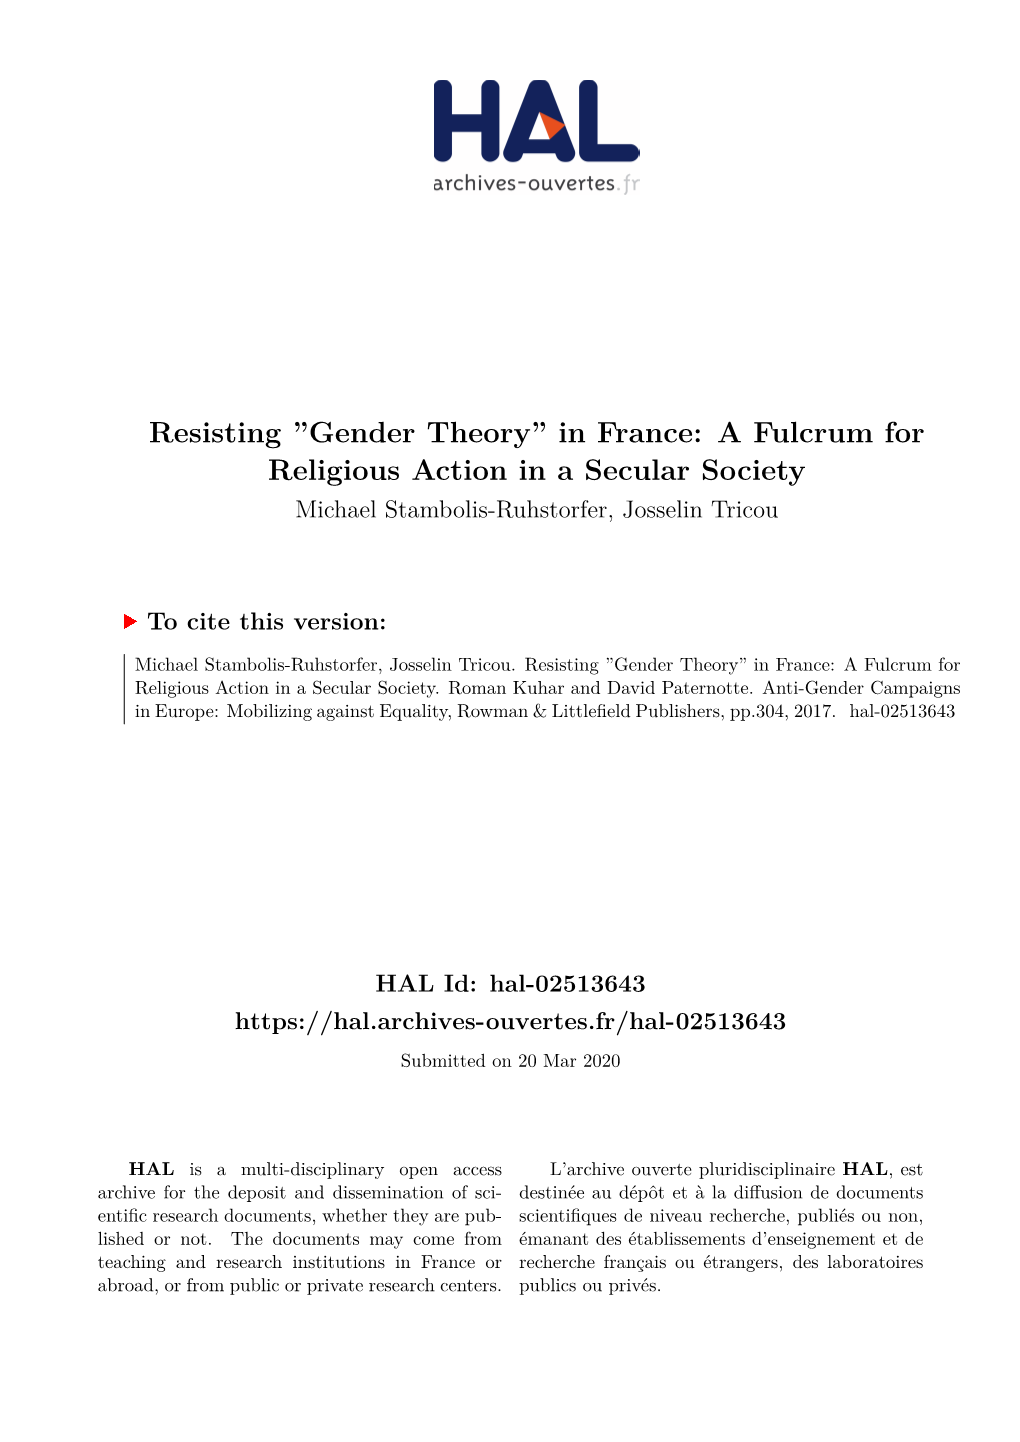 Gender Theory” in France: a Fulcrum for Religious Action in a Secular Society Michael Stambolis-Ruhstorfer, Josselin Tricou